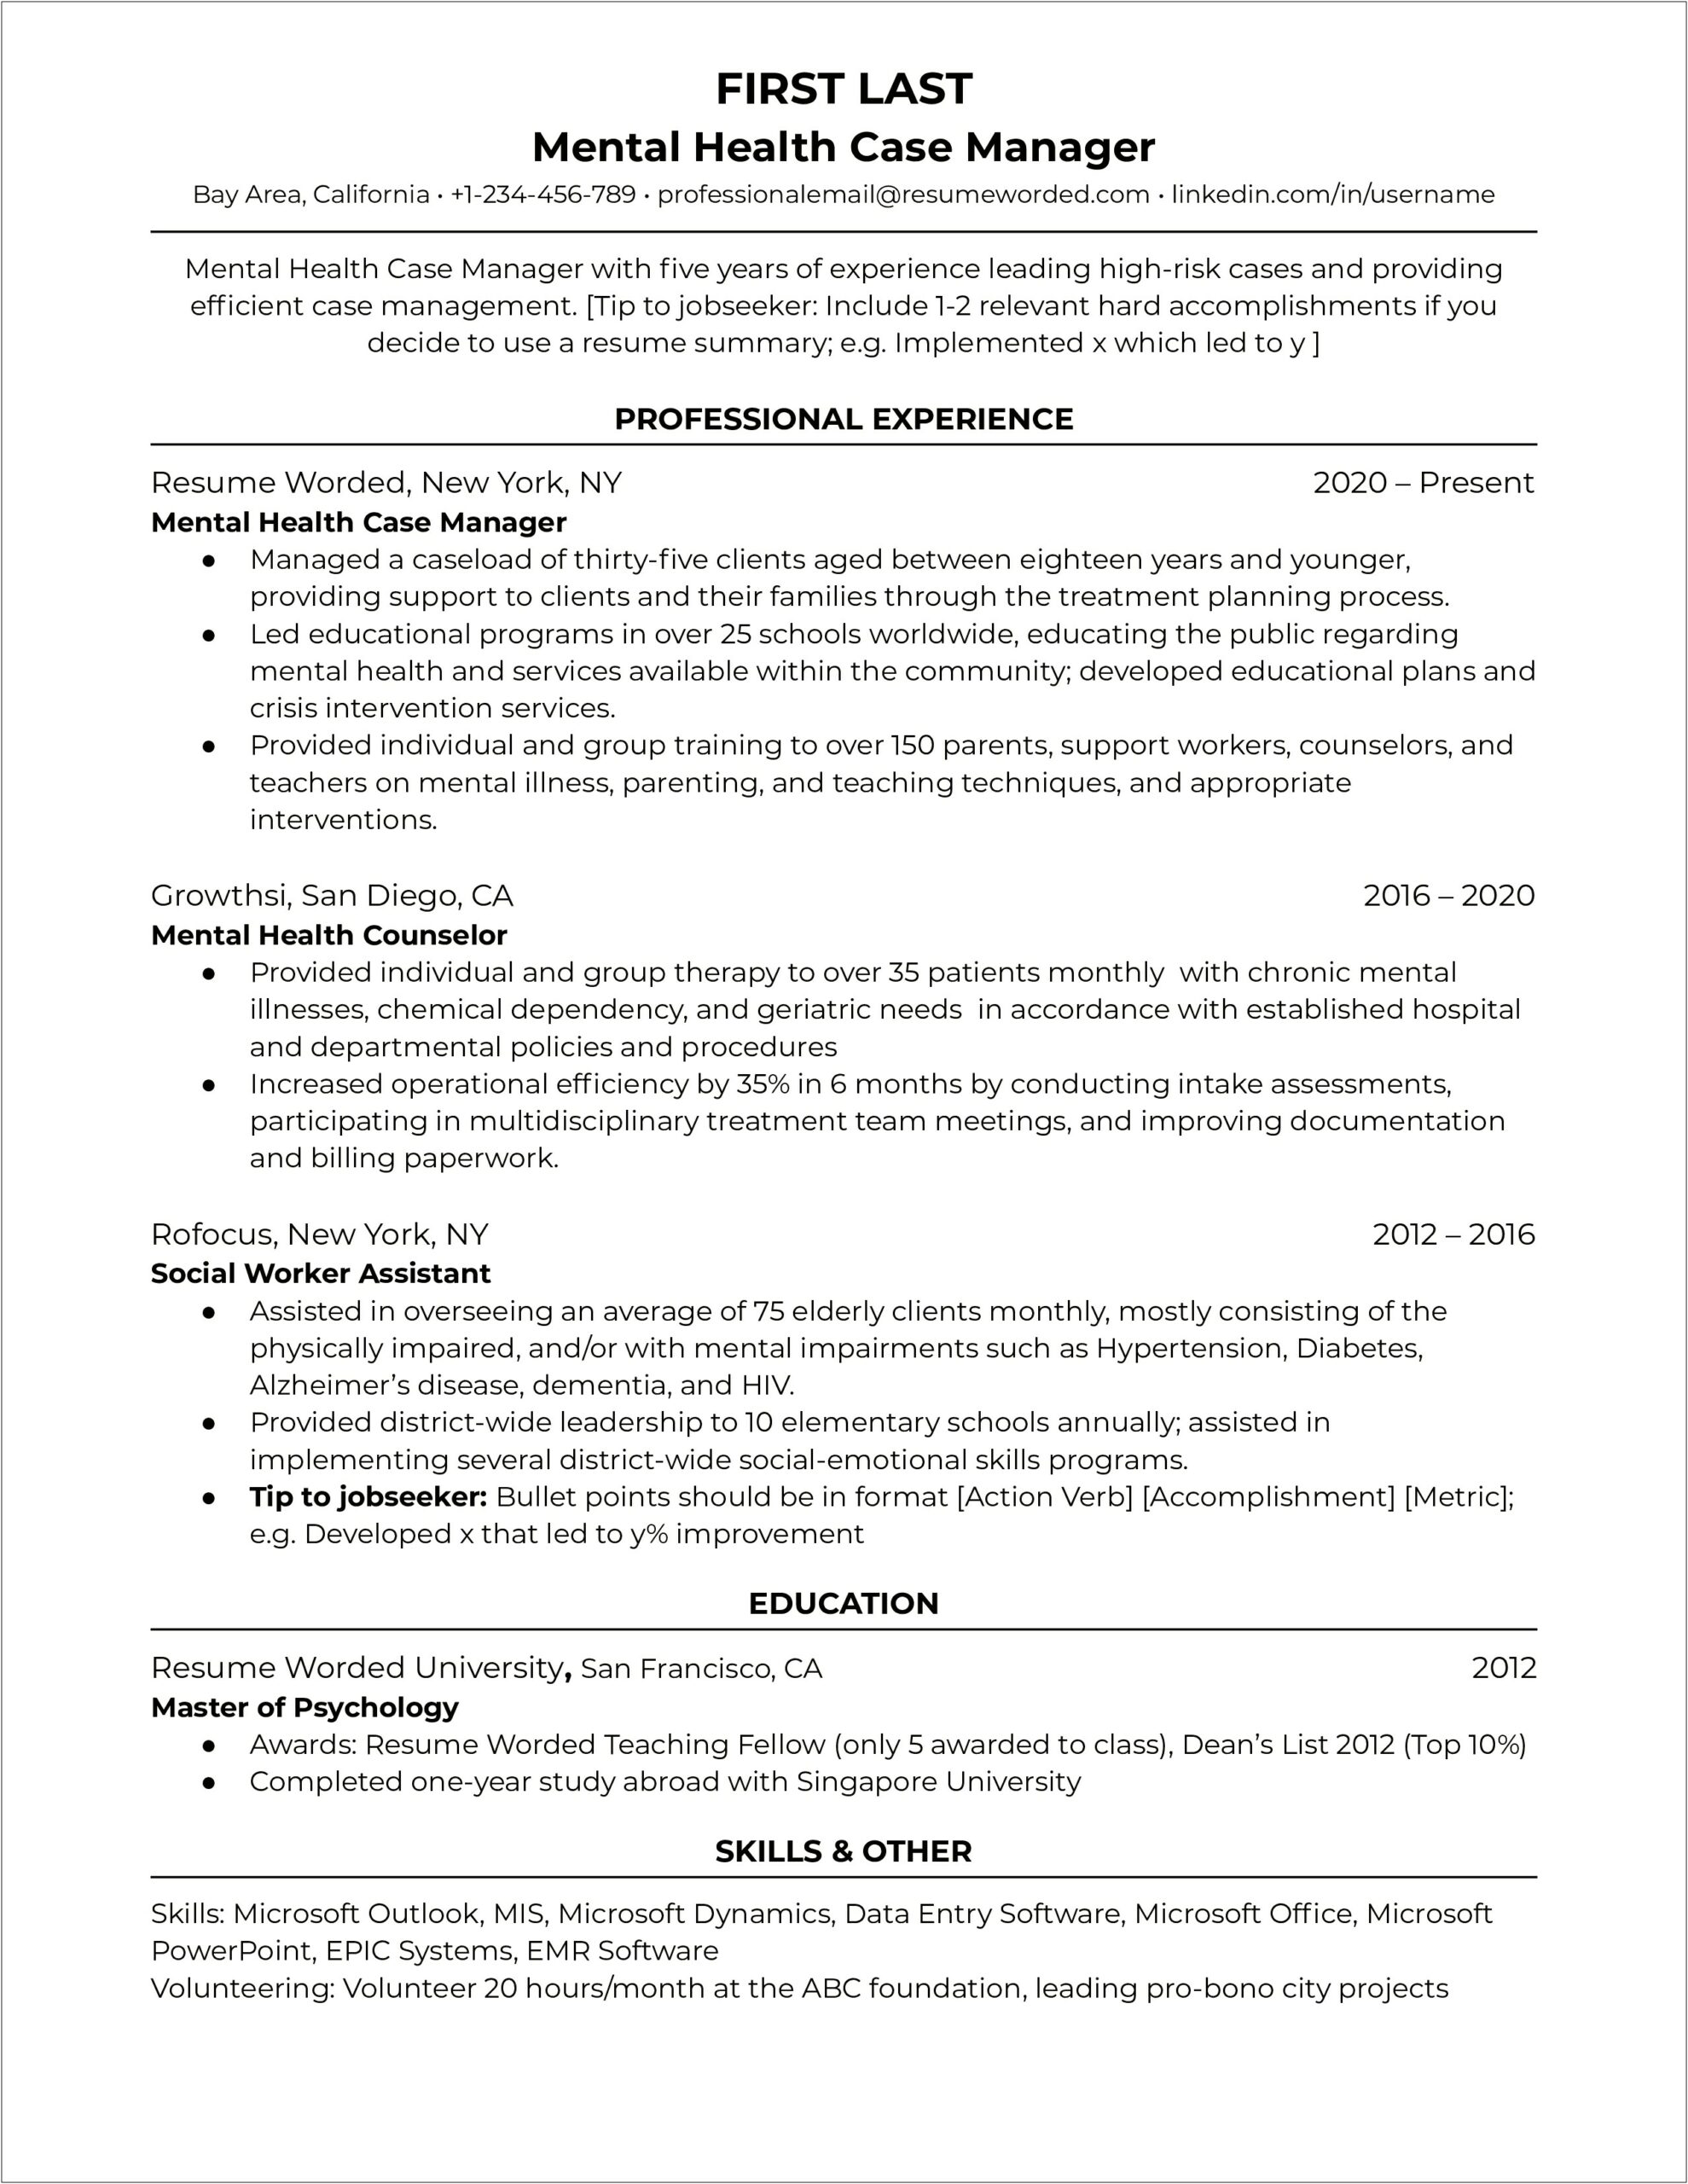 Wound Care Manager Resume Sample